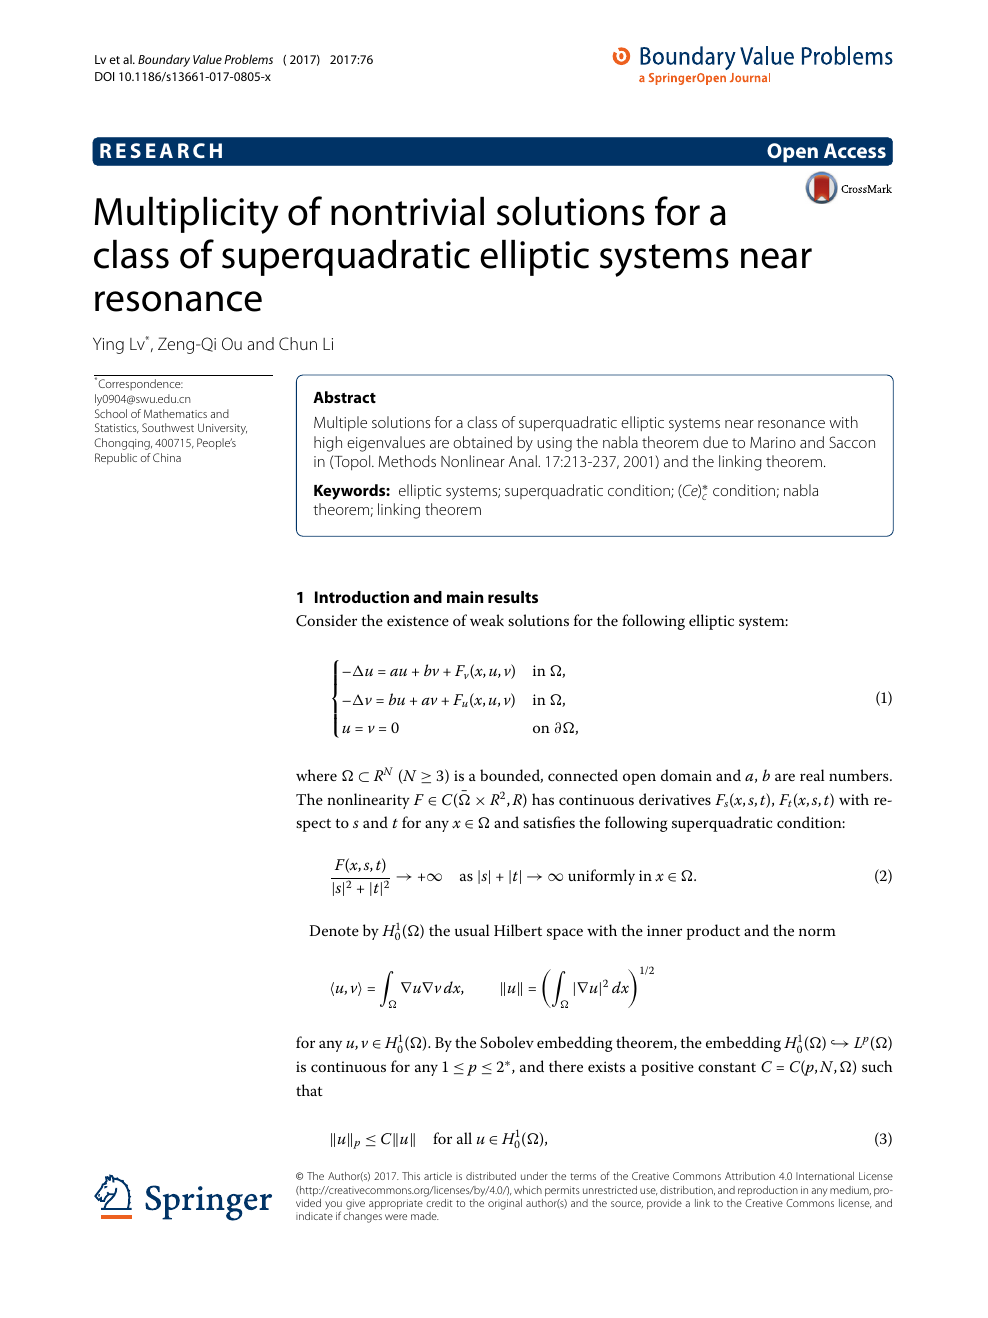 Multiplicity Of Nontrivial Solutions For A Class Of Superquadratic Elliptic Systems Near Resonance Topic Of Research Paper In Mathematics Download Scholarly Article Pdf And Read For Free On Cyberleninka Open Science